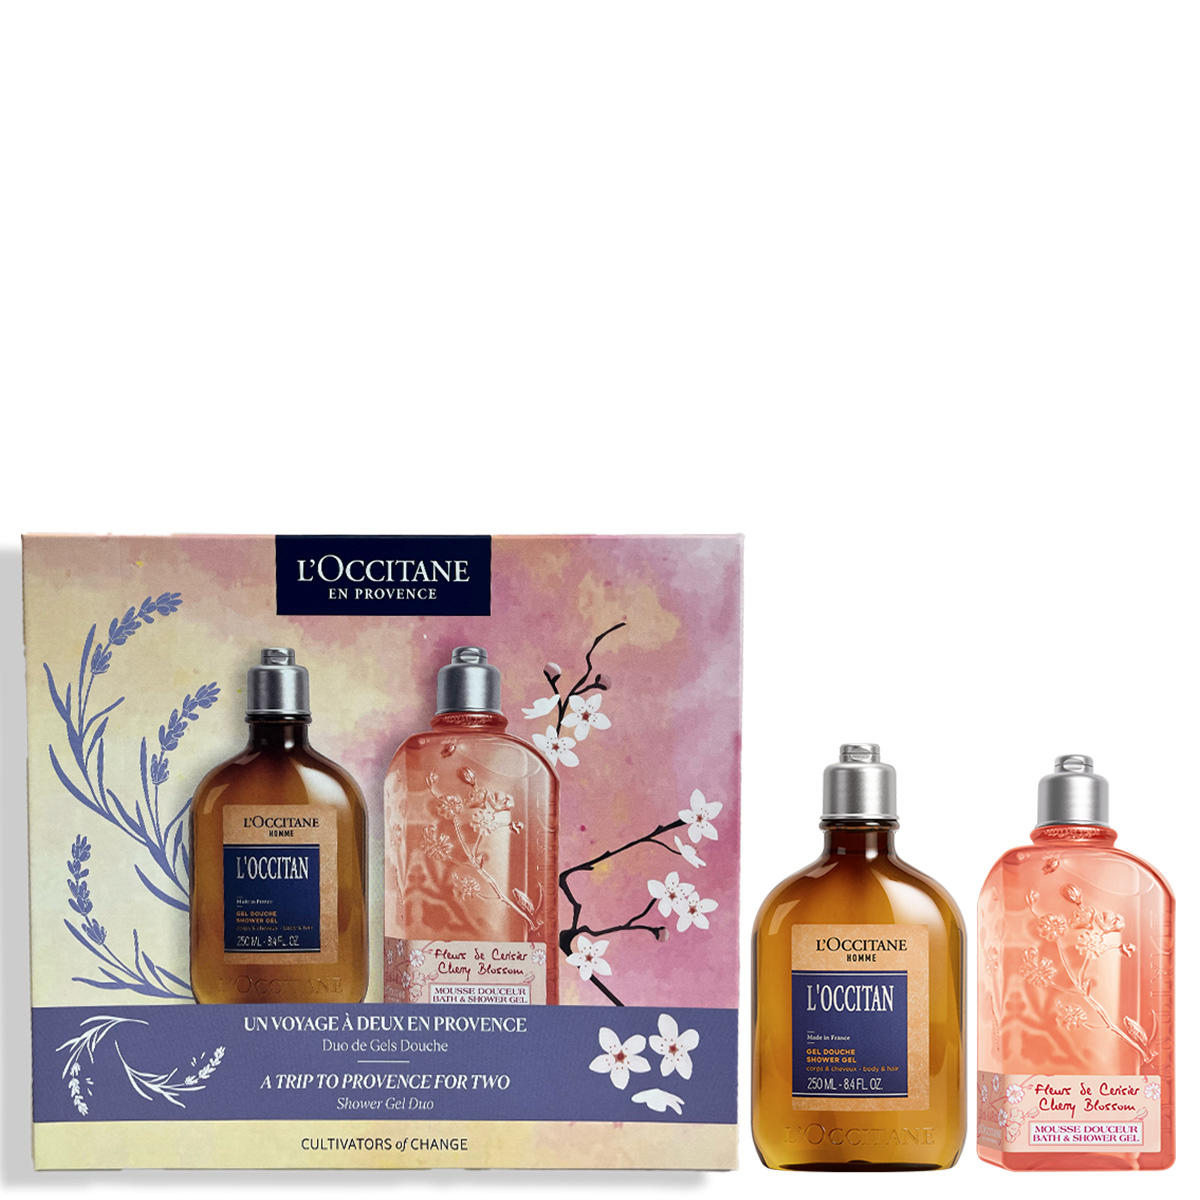 L'Occitane A trip to Provence for two Shower gel duo  2 x 250 ml - 2